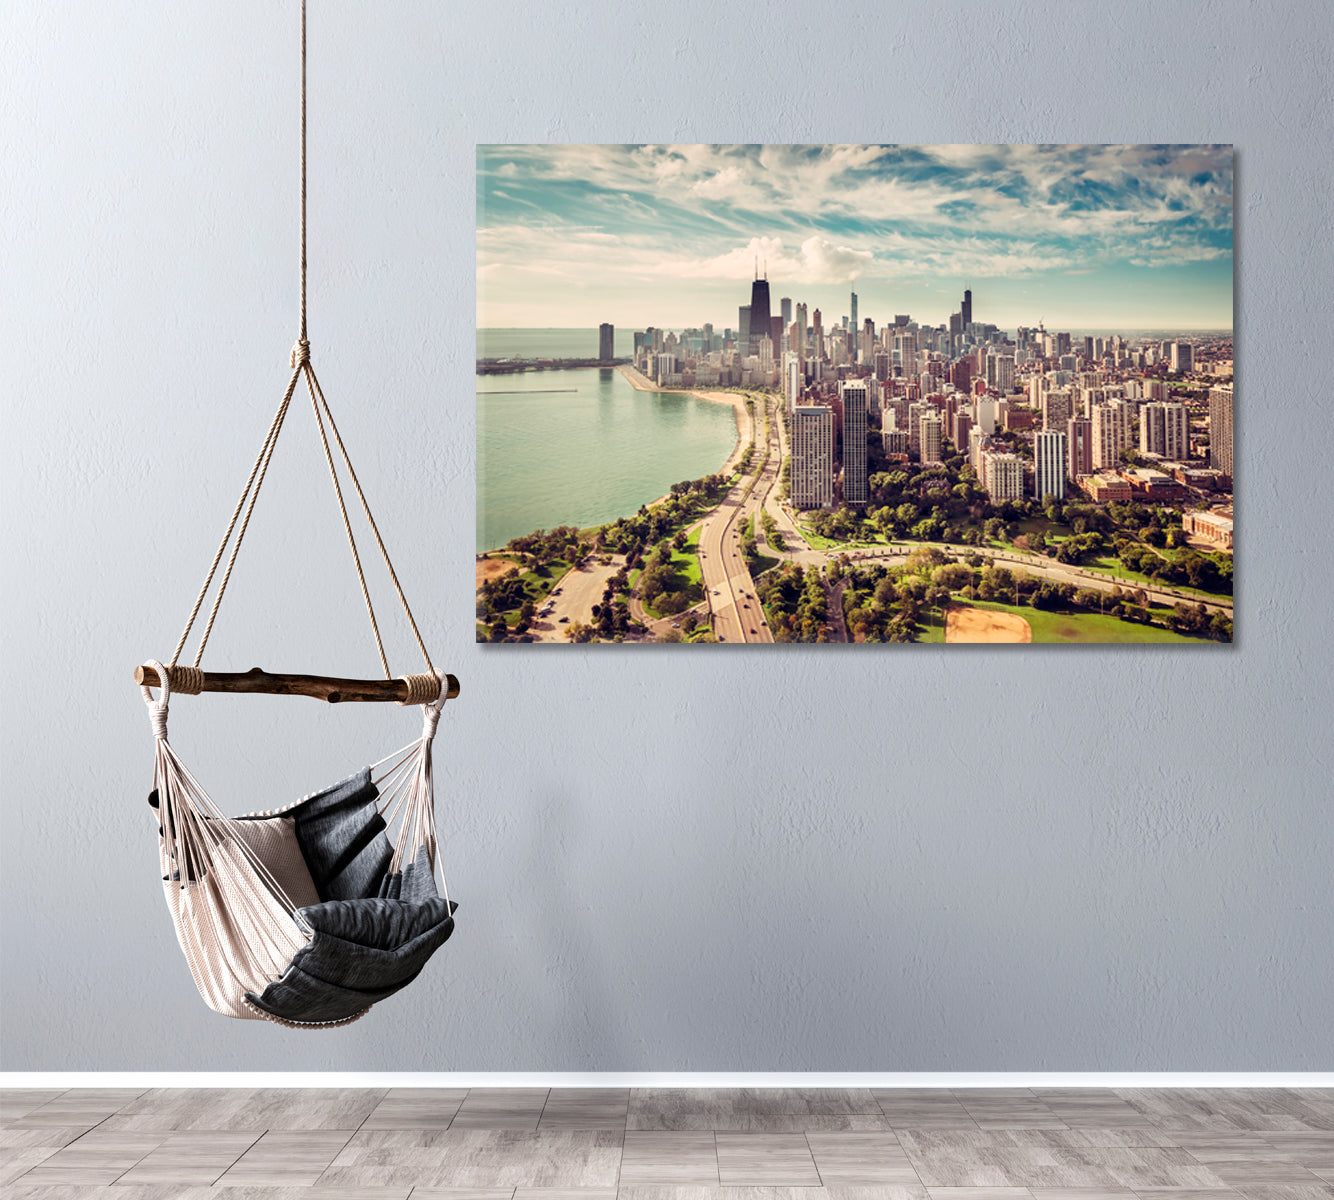 Chicago Skyline with Road by the Beach Canvas Print ArtLexy 1 Panel 24"x16" inches 